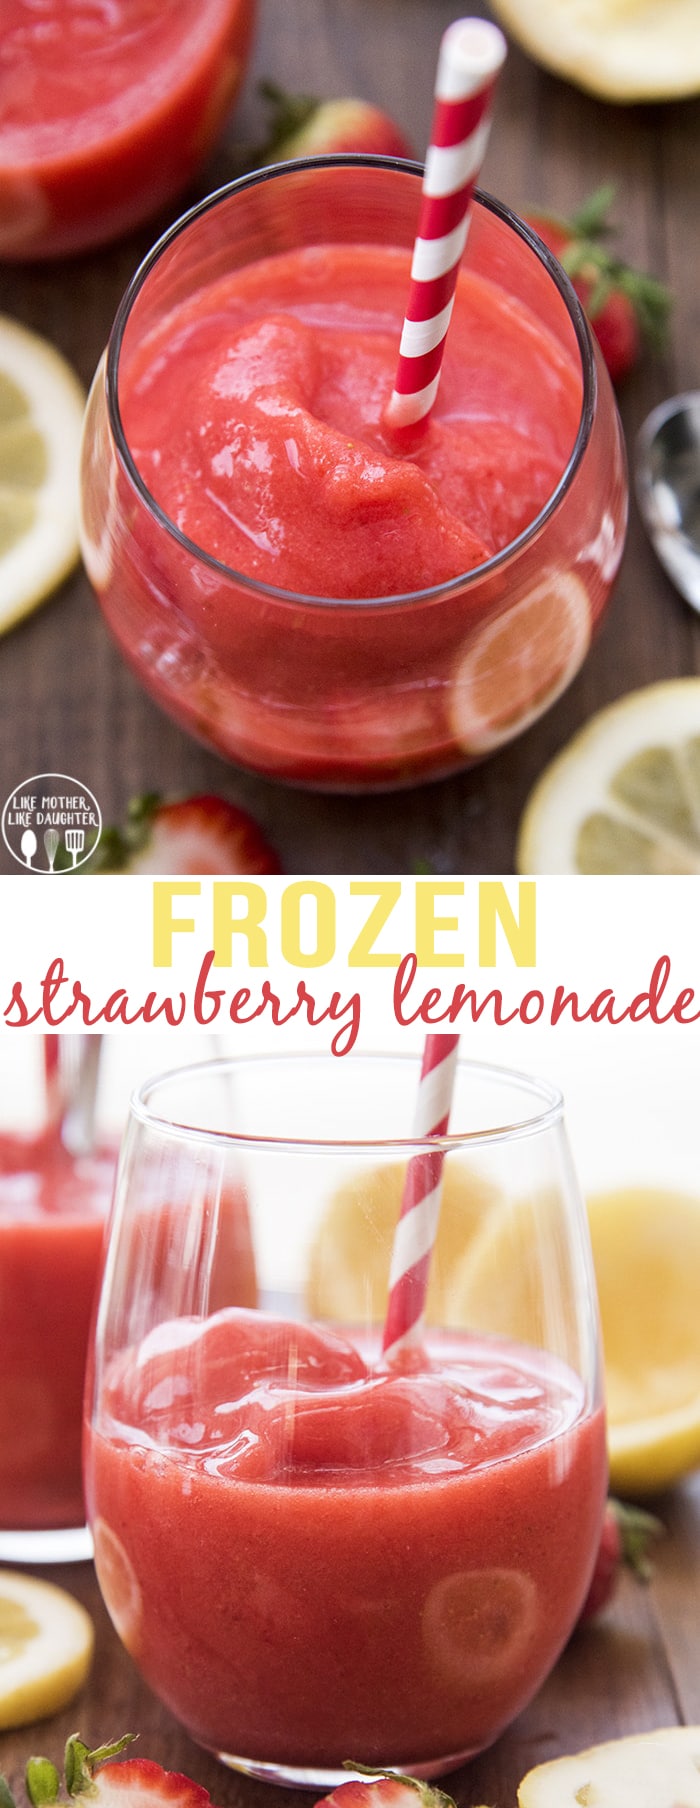 Frozen Strawberry Lemonade is the perfect sweet and tangy cold treat to help you stay cool this summer!